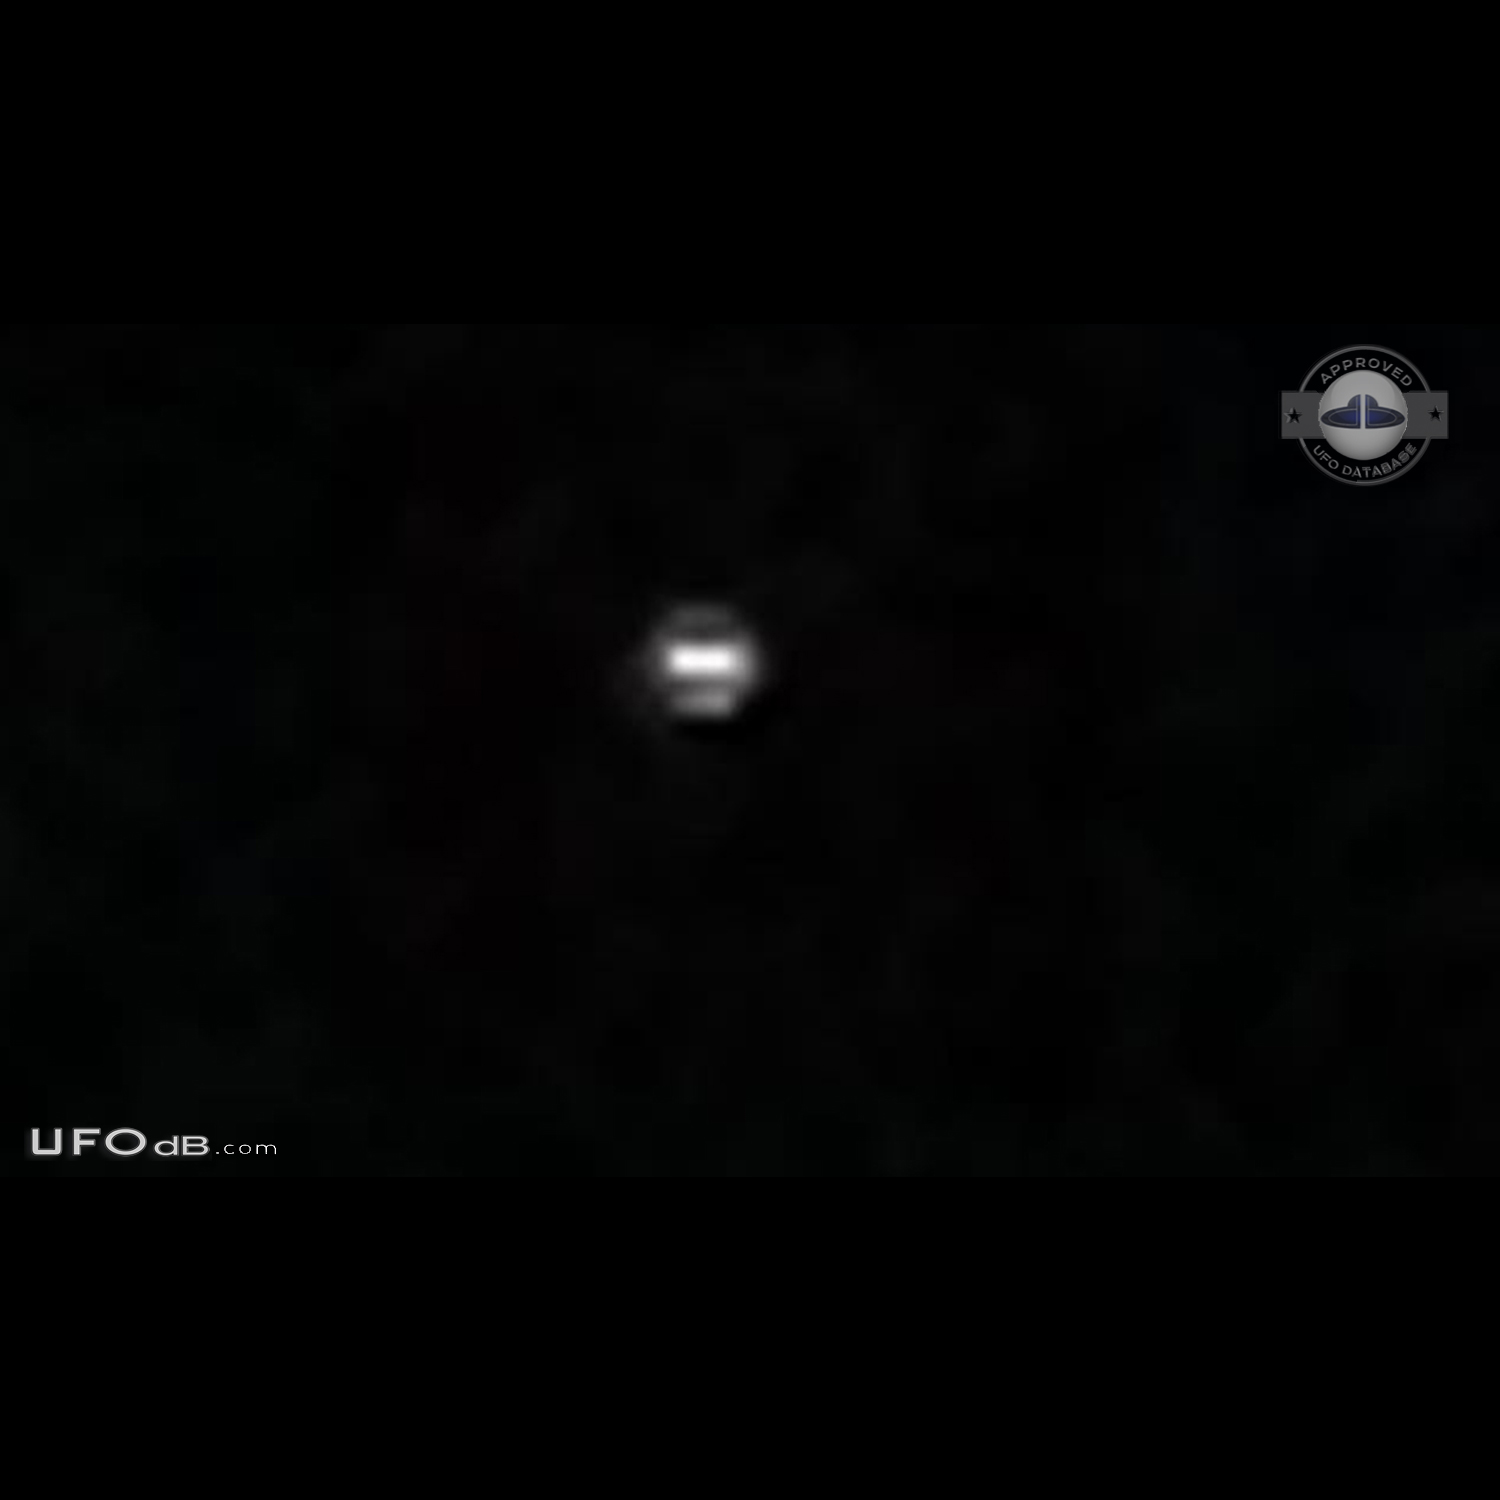 Airplane Passenger UFO sighting from Phoenix Bound Plan March 2015 UFO Picture #661-1